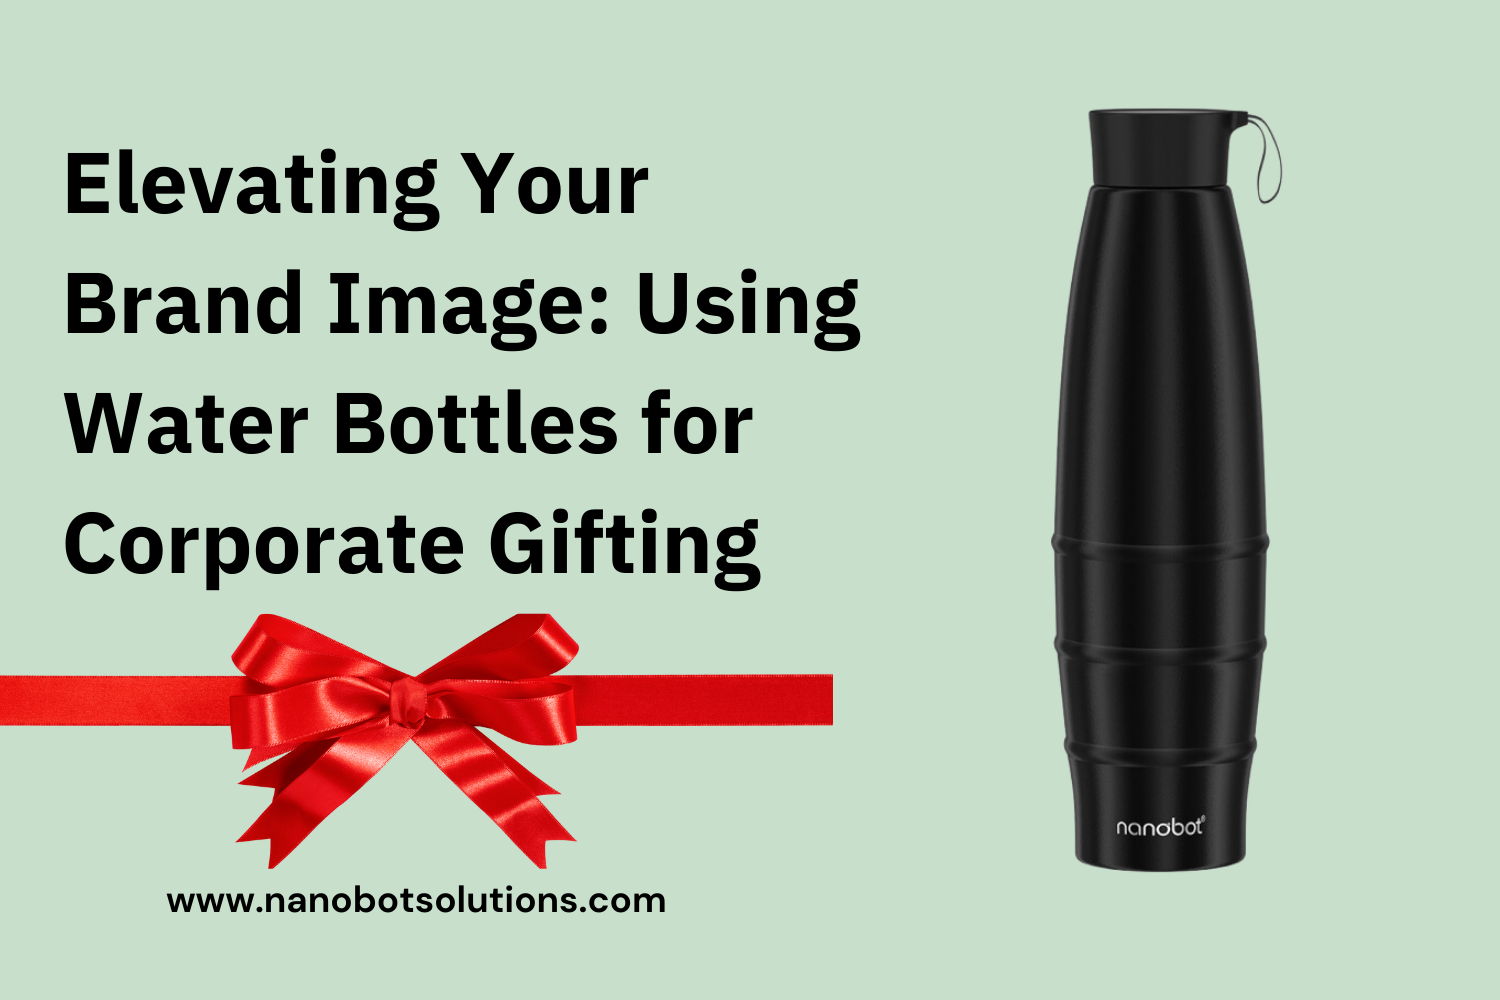 Elevating Your Brand Image: Using Water Bottles for Corporate Gifting